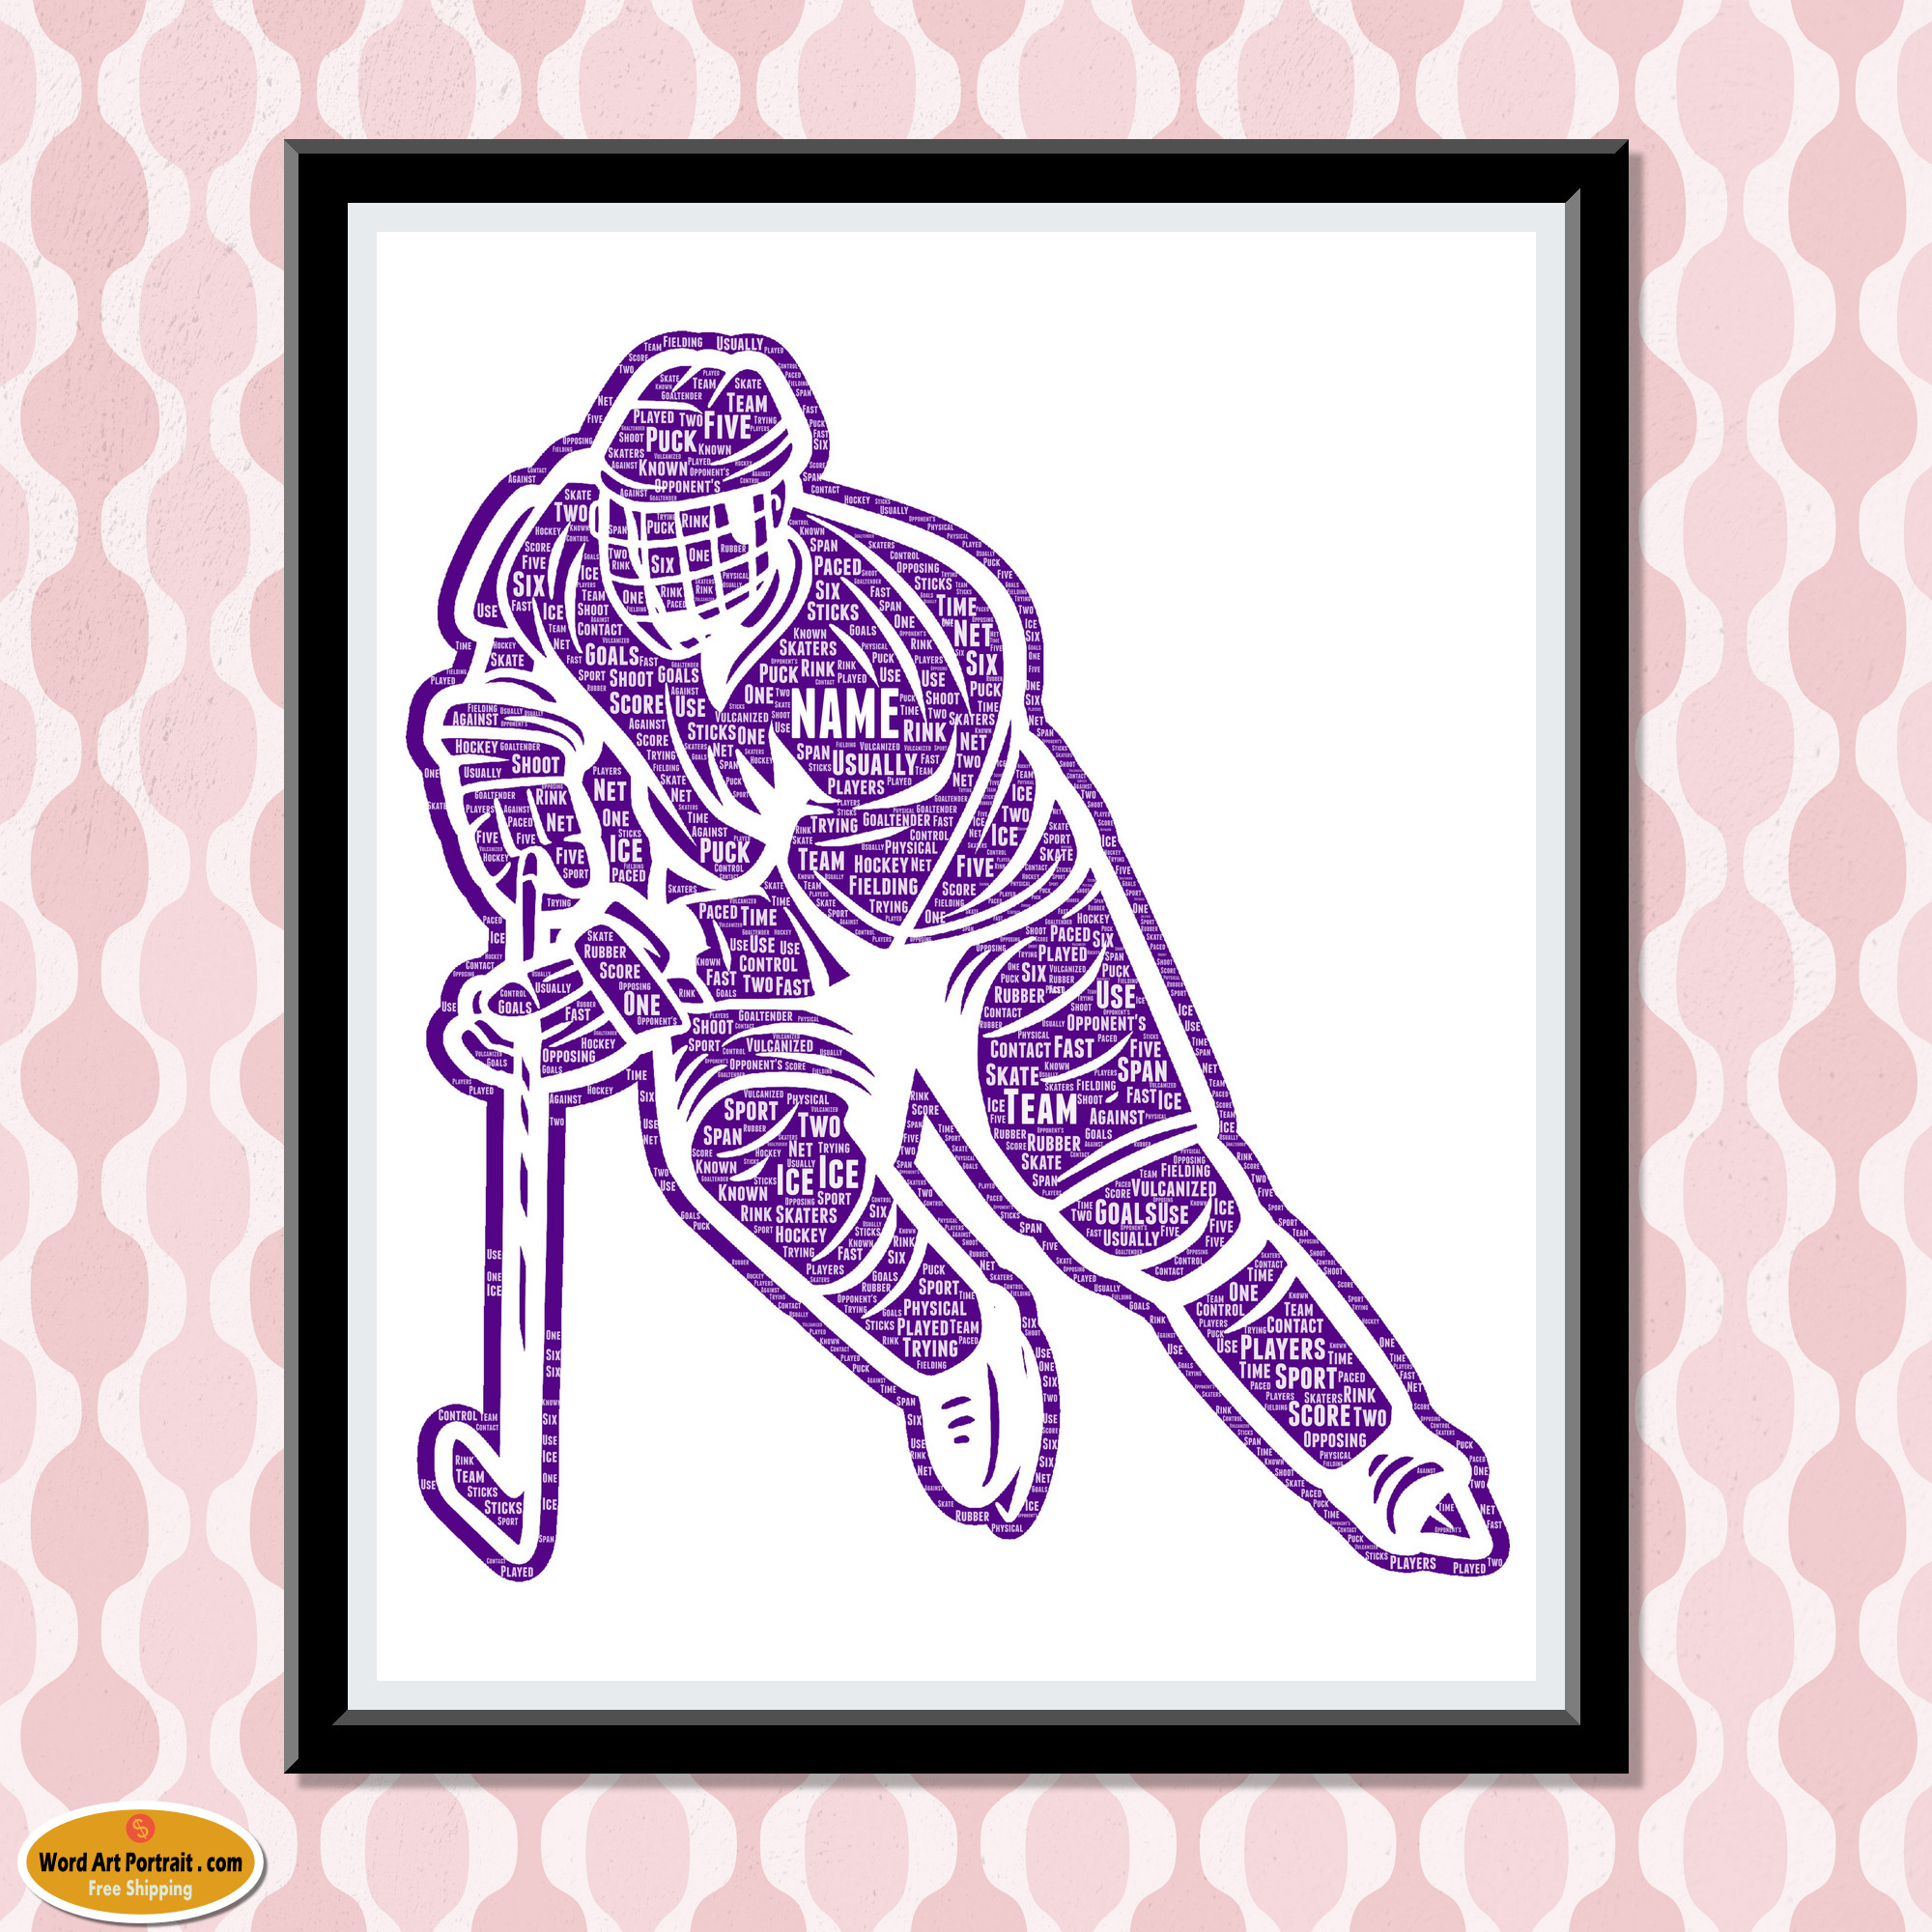 Gift For Hockey Coach,Wall Art,Custom Gift Gifts For Him,Hockey Players Gift Mothers Day Ice Hockey Gifts Ice Hockey Photo Collage